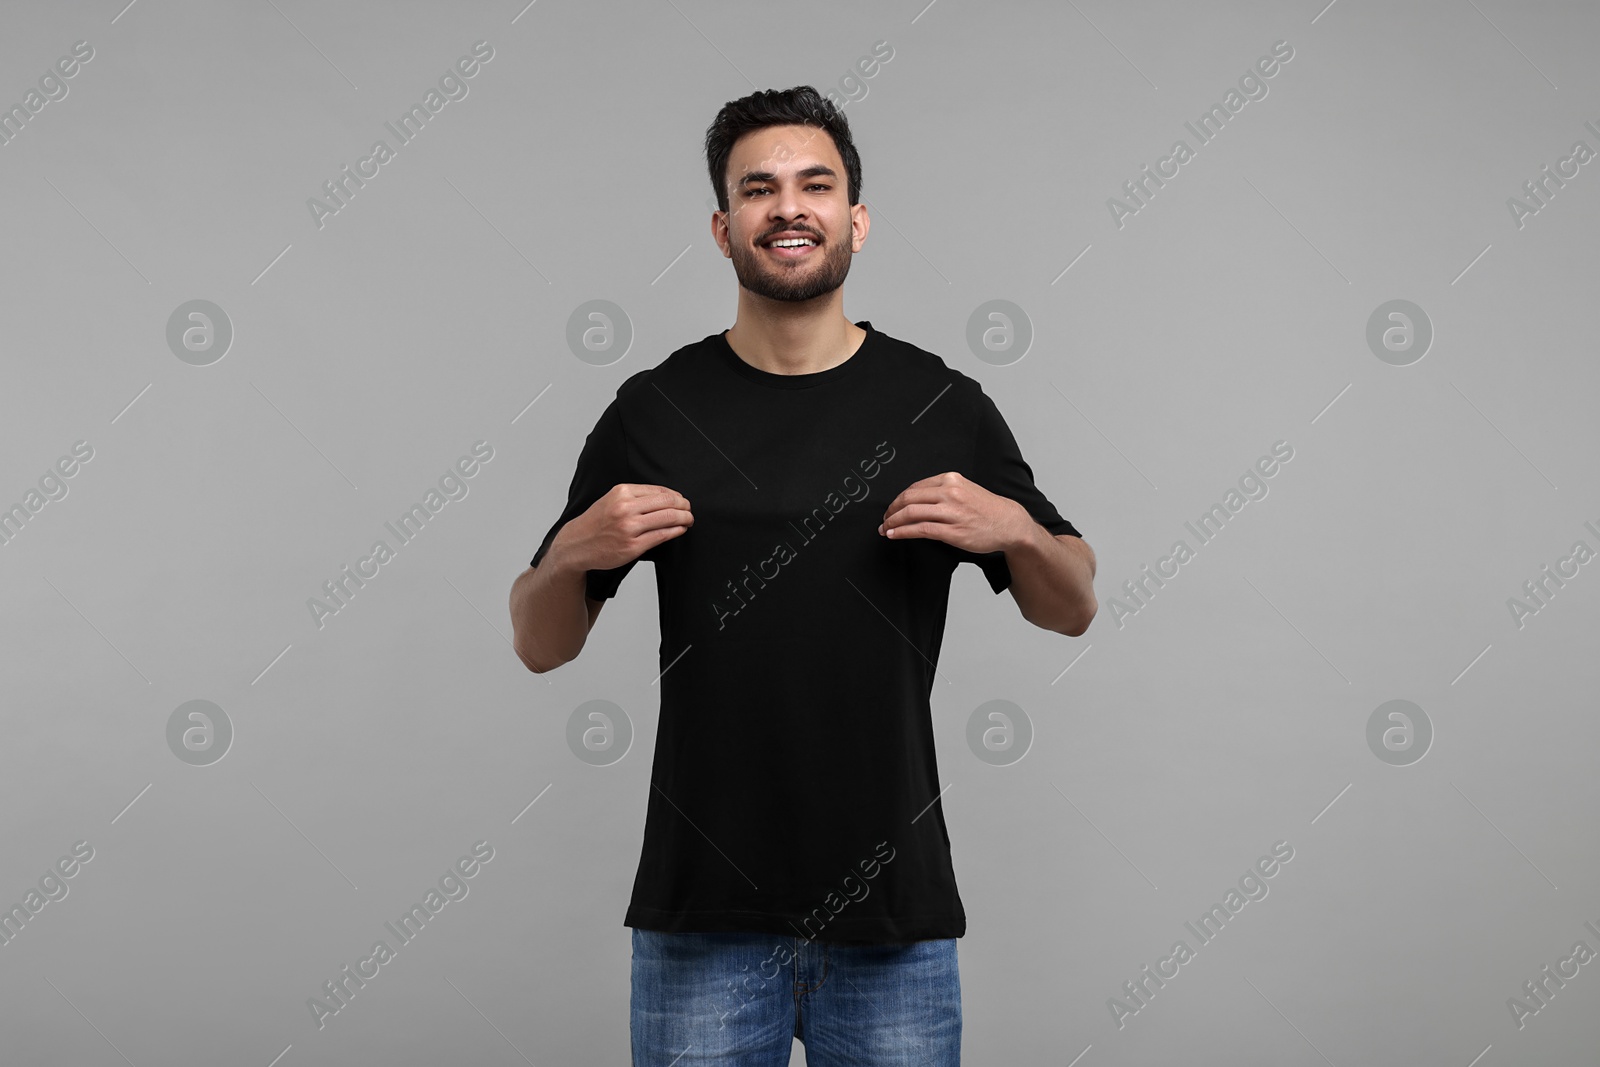 Photo of Smiling man in black t-shirt on grey background